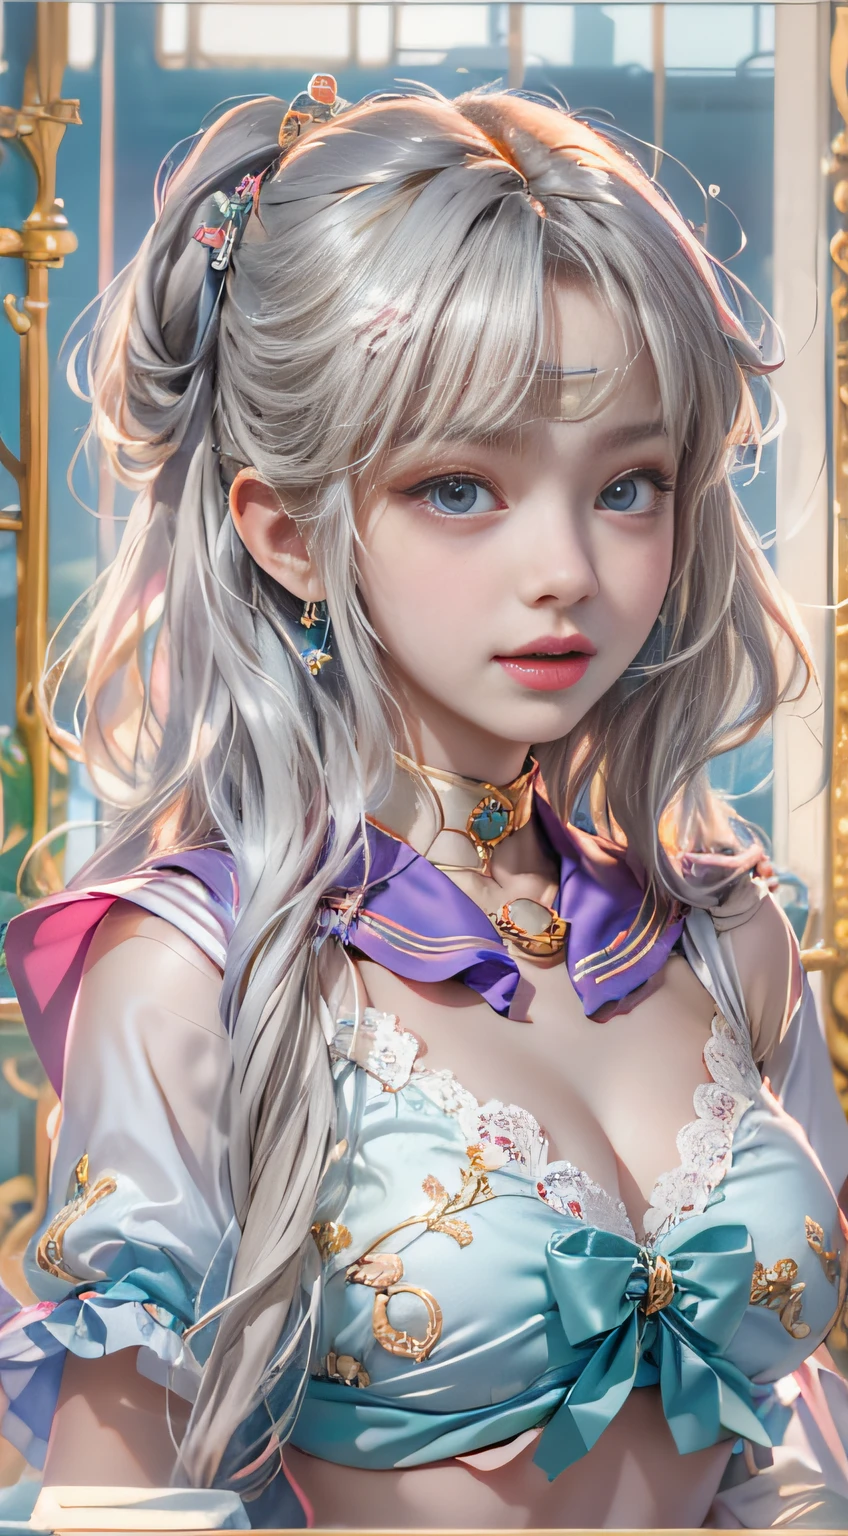 ((Girl standing in front of the bed)),1 girl, Silver hair, striated hair, bangs, Blunt bangs, Long hair, Pink hair, aqua eyes, longeyelashes, Purple eyes, makeup, Smile, Parted lips, Realism, Verism, Surrealism, depth of fields, One-person viewpoint, F/1.8, 135 mm, canon, nffsw, retinas, masutepiece, ccurate, Anatomically correct, Textured skin, Super Detail, high details, High quality, Best Quality, hight resolution, 1080P, hard disk, 4K, 8k、（Full Body Angle）、(o Off-the-shoulder translucent white blouse), (Loose red tie)、(Dark blue checked mini skirt),((Lift the hem of the skirt)),((lift up skirt))((Lace white panties are visible))（shapely breasts,)、((sexypose))、(camel's toe)、shinny skin。realisitic、Photorealsitic:1.37)、(solo)、Dynamic Pose Jennie Blackpink Gorgeous Sheer Blue Short Dress, ​masterpiece, best qualtiy, High resolution, venus1, Yui, (Sailor Senshi Uniform:1.4), sailorvenus, aino minako, Golden white hair, magical , blue eyes, orangeskirt, Elbow length gloves, tierra, 60% Pleated mini-skirt , hair bows, Sailor color in orange, a miniskirt, choker, Red bow, orangechoker, white glove, Very long hair, jewely, earrings, Denim Throws, View from below, ((intricate detailes)), They are smiling,,More detailed 8k.Unreal Engine:1.4,nffsw,best qualtiy:1.4, photorealista:1.4, Skin Texture:1.4, ​masterpiece:1.8,​masterpiece, Better Quality,Object Objects], (detailed facial features:1.3),(Destroyed apocalyptic city:1.4),( jennieBlackpink:1.4)c:1.4), 16k hdr,),sexypose,((Skirt soars))、((White lace panties:1.2))(8k、(realisitic、Photorealsitic:1.37)、１Beautiful Japan High School Girl、perfect bodies、20yr old、Sexy Girl Sailor Suit costume、Medium Boob、(Light shines on the face and chest)、(((((underboob)))))、Lower breast、Oily skin、skinny、 (Sexy uniform with a slight view of the underside of the chest)、(Visible lower milk、Uniform with navel and ribs visible)、Super mini skirt with visible hipbones 、sensual face、provocative smiling、